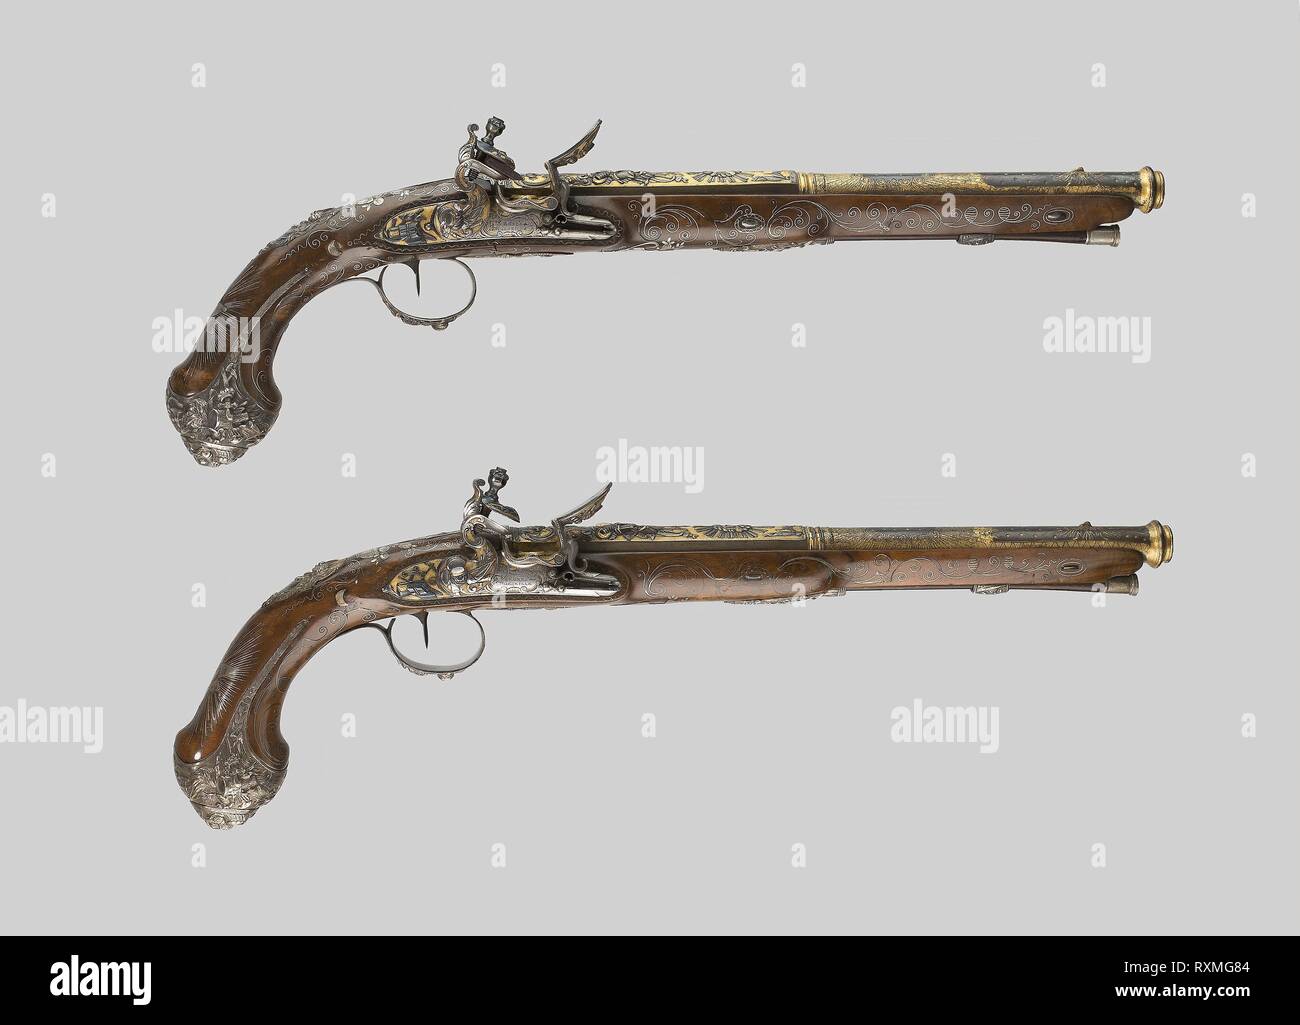 Pair of Presentation Flintlock Pistols in the Eastern Fashion. Gunsmith: Vergnes; (French, active about 1825-45) Marseille. Date: 1801-1825. Dimensions: L. 51.5 cm (20 1/4 in.)  Barrel L. 34.6 cm (13 5/8 in.)  Wt. 2 lb. 14 oz.  Caliber .64. Steel, silver, gold, walnut, and flint. Origin: Marseille. Museum: The Chicago Art Institute. Stock Photo